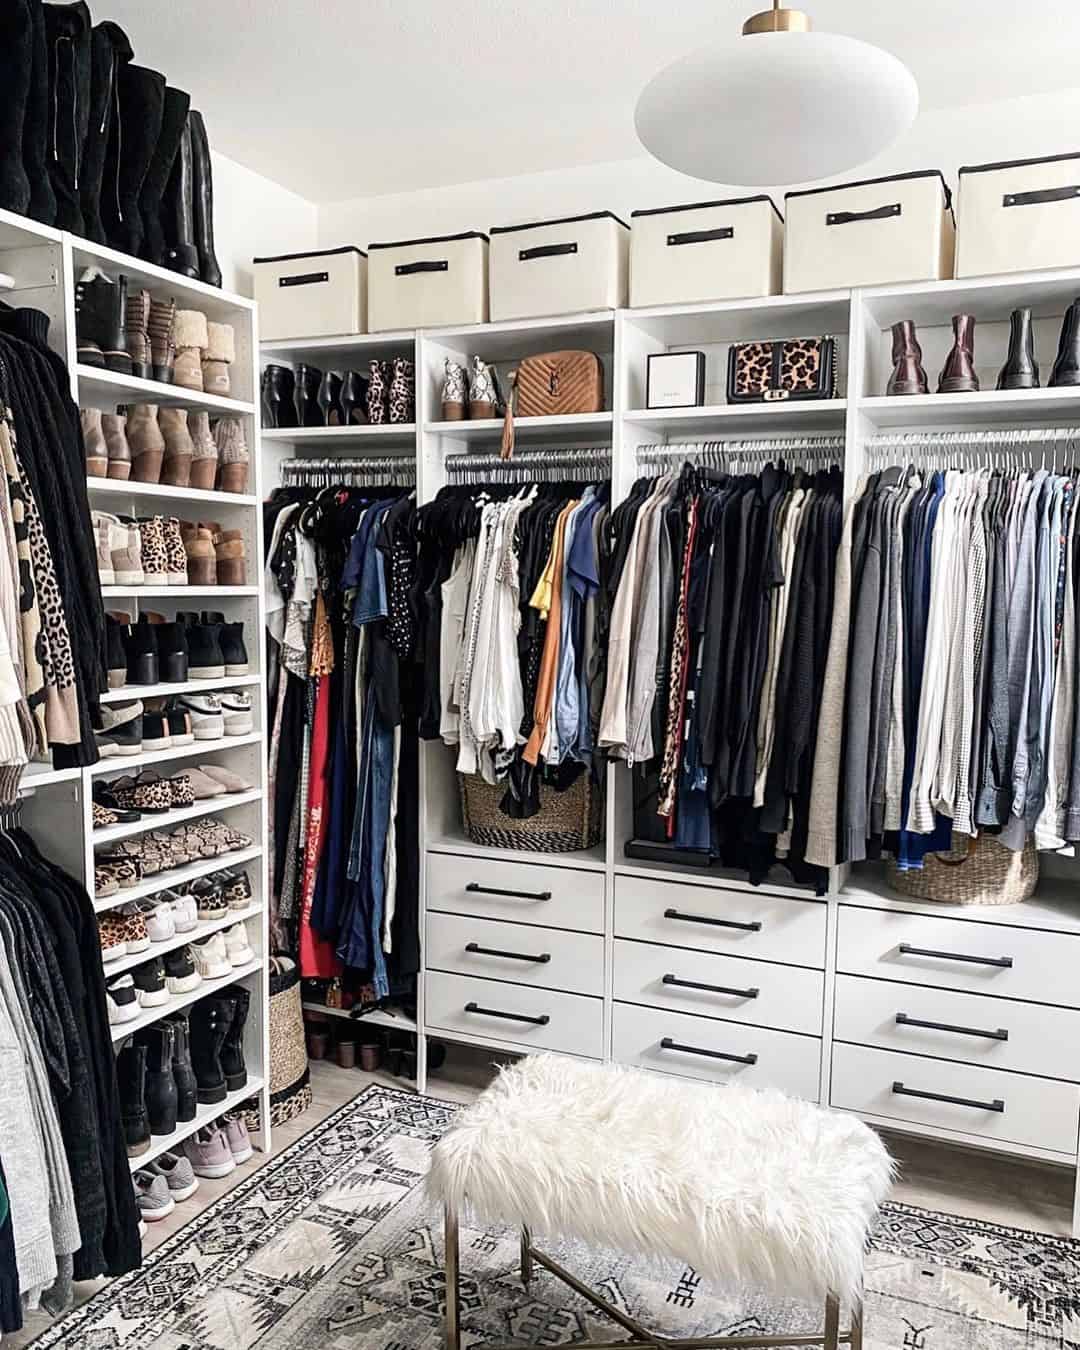 Master Closet With White Ottoman and Patterned Rug - Soul & Lane